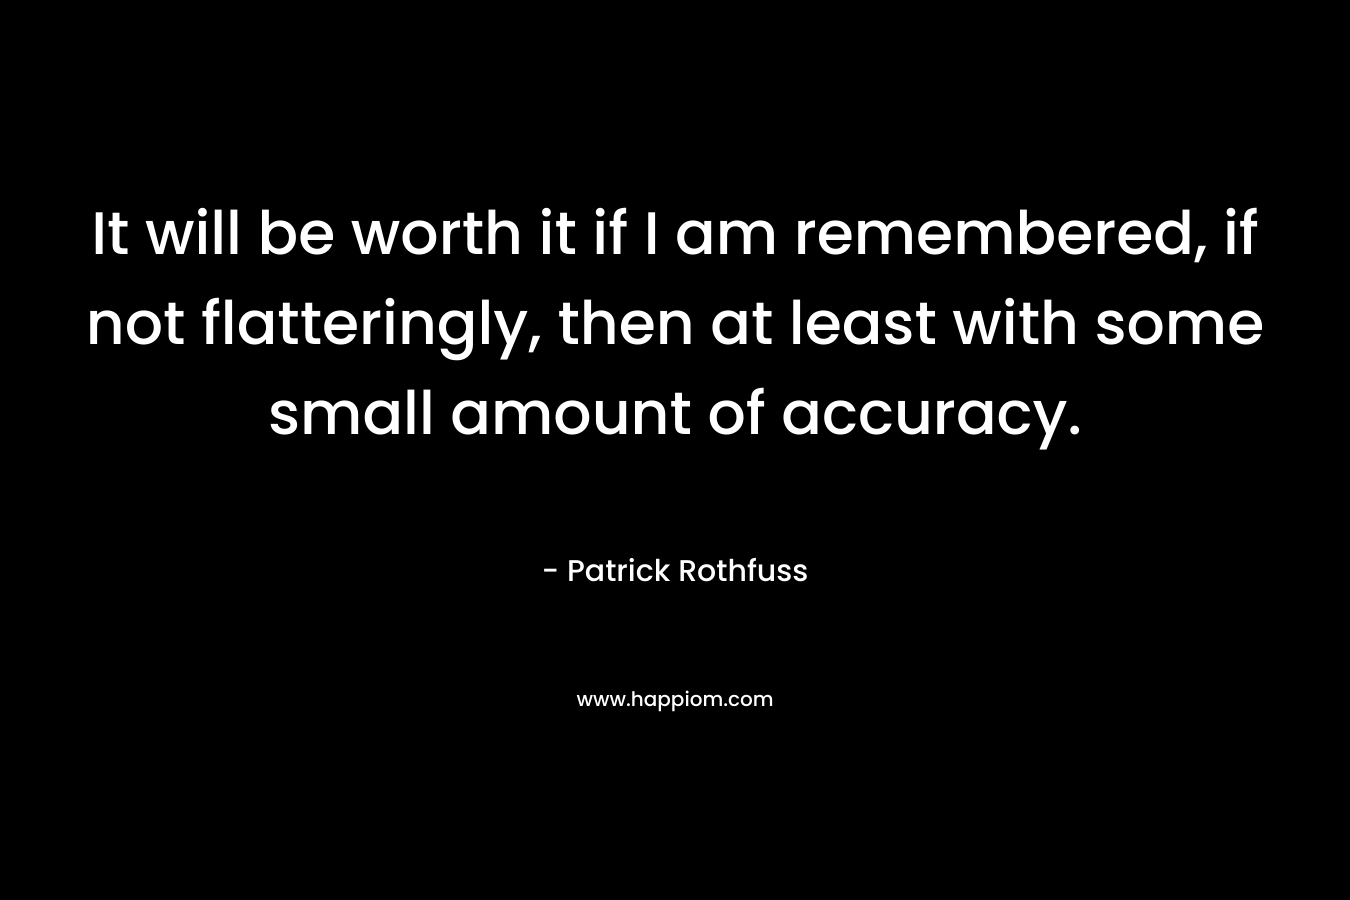 It will be worth it if I am remembered, if not flatteringly, then at least with some small amount of accuracy.